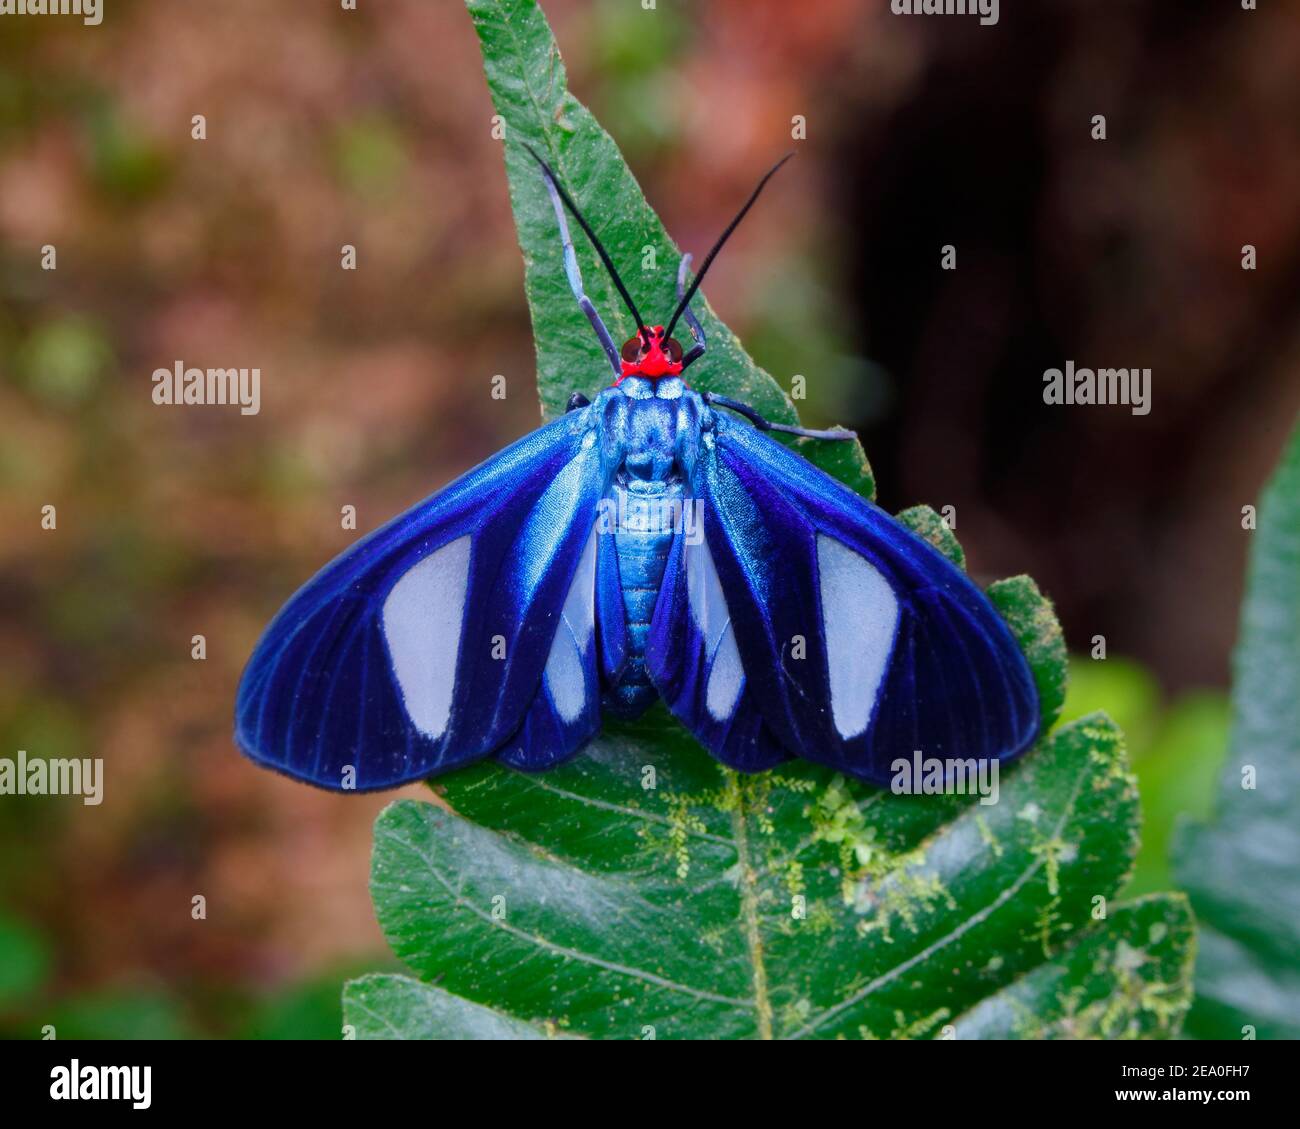 A colorful moth in the, Erebidae, family at rest on a leaf. Stock Photo